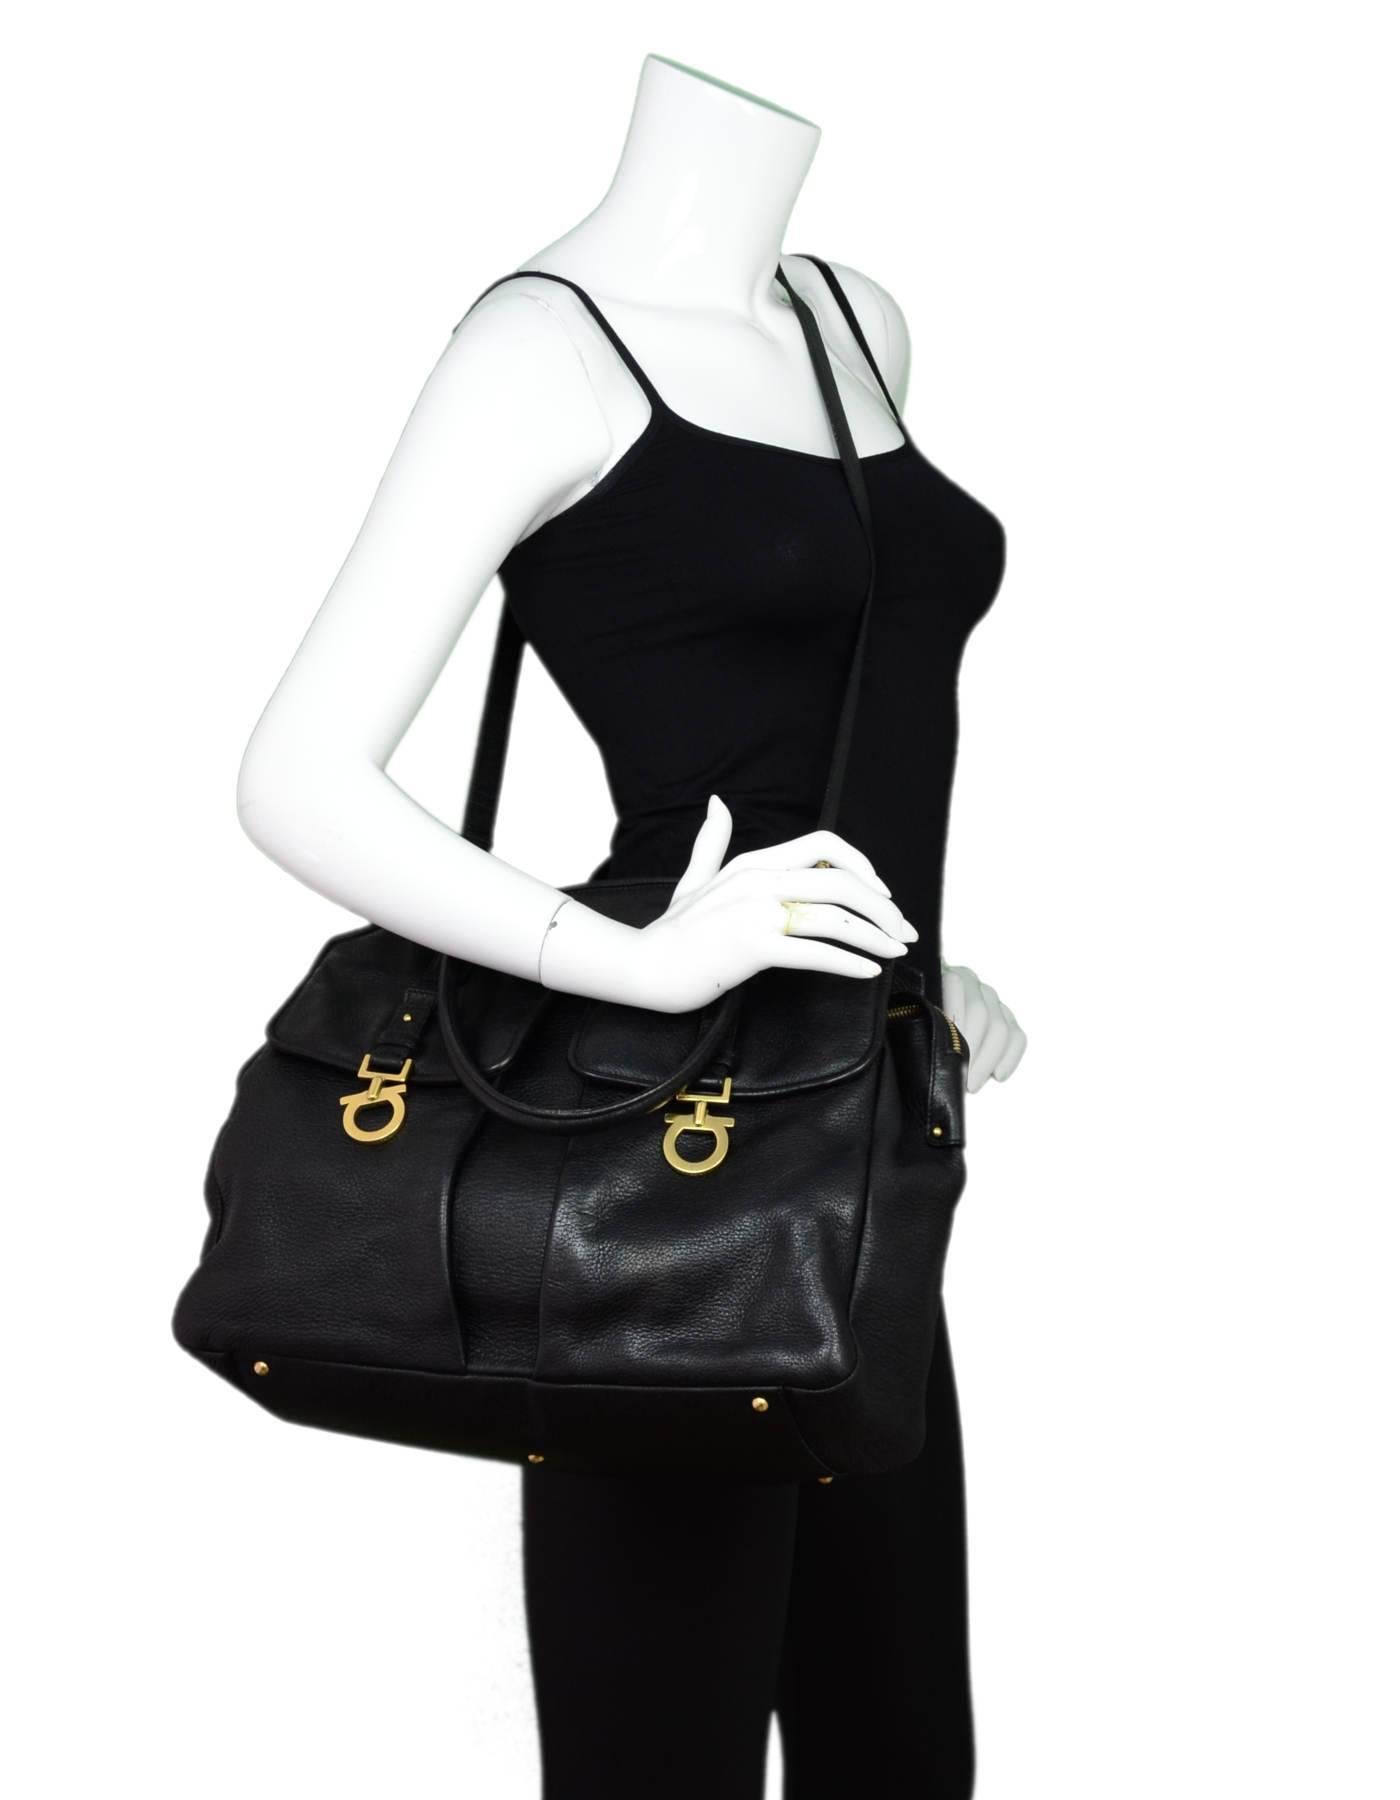 Salvatore Ferragamo Black Leather Satchel Bag

Made In: Italy
Color: Black
Hardware: Goldtone
Materials: Leather, metal
Lining: Brown textile
Closure/Opening: Zip top
Exterior Pockets: Two front pockets, back pocket
Interior Pockets: Zip pocket, two